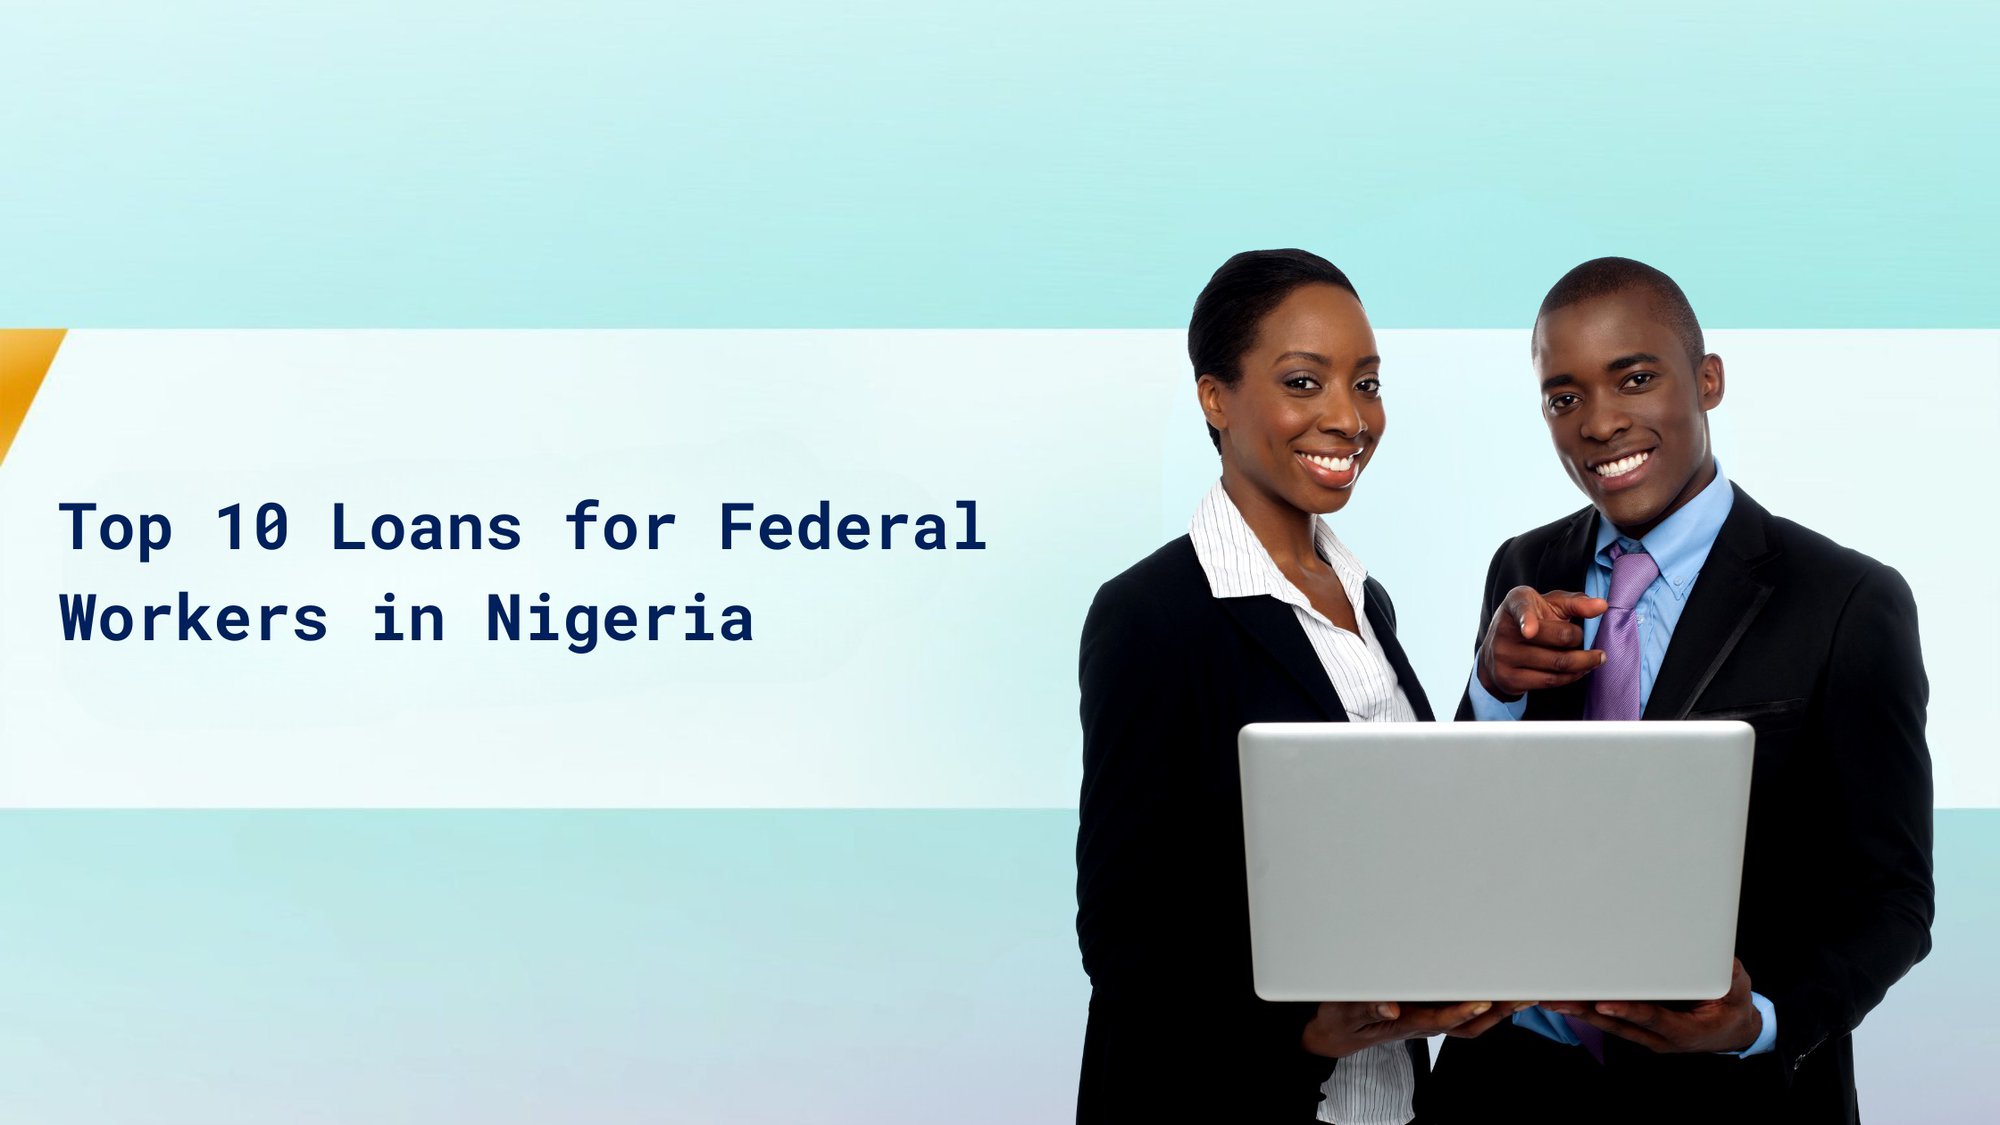 Top 10 Loans for Federal Workers in Nigeria